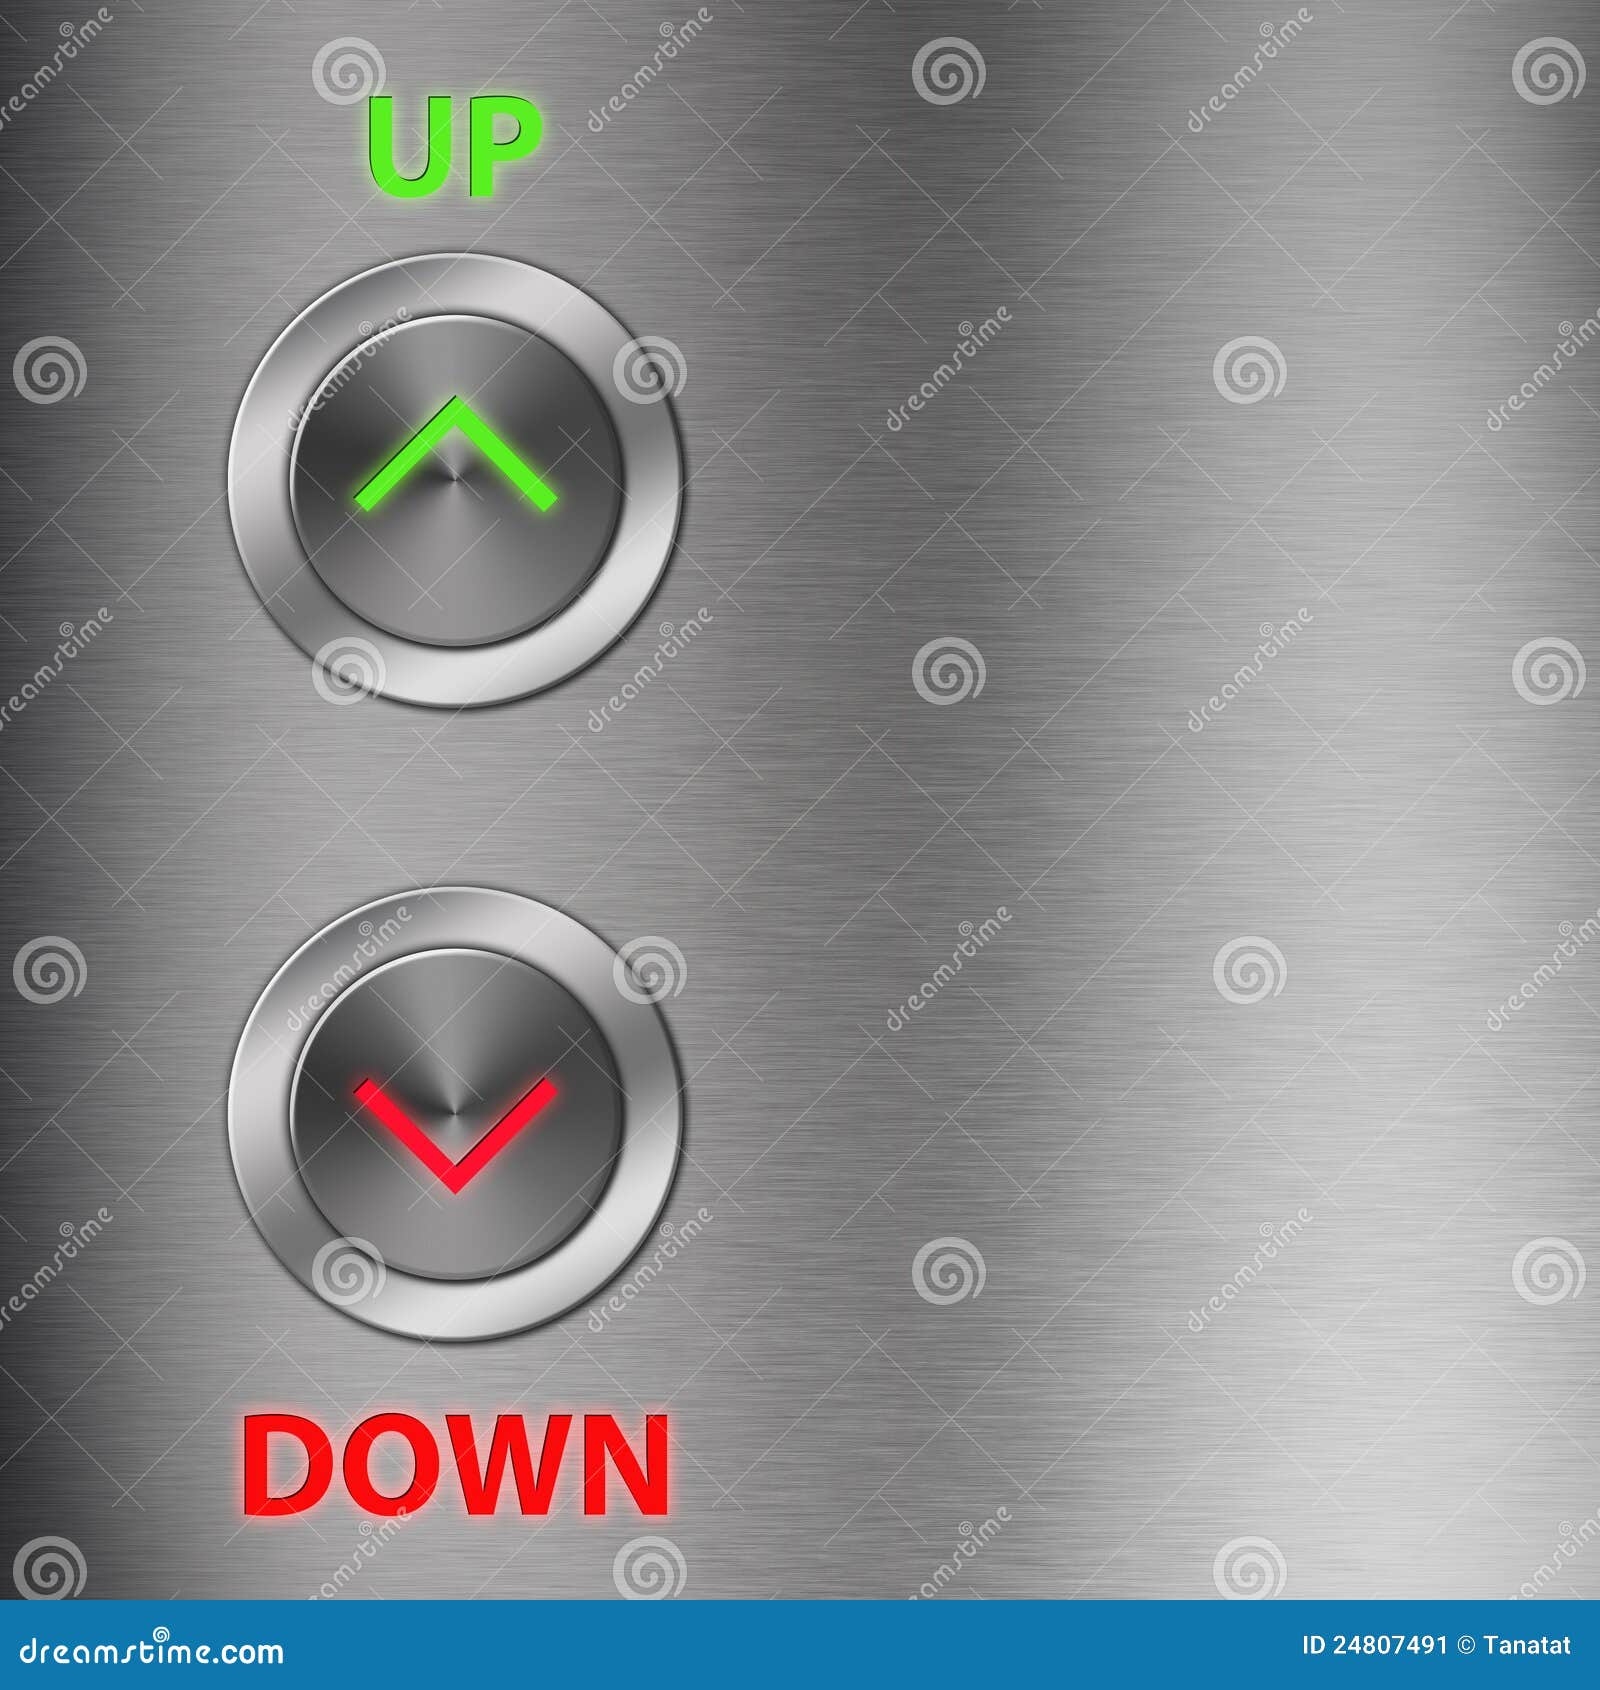 up and down metalic button